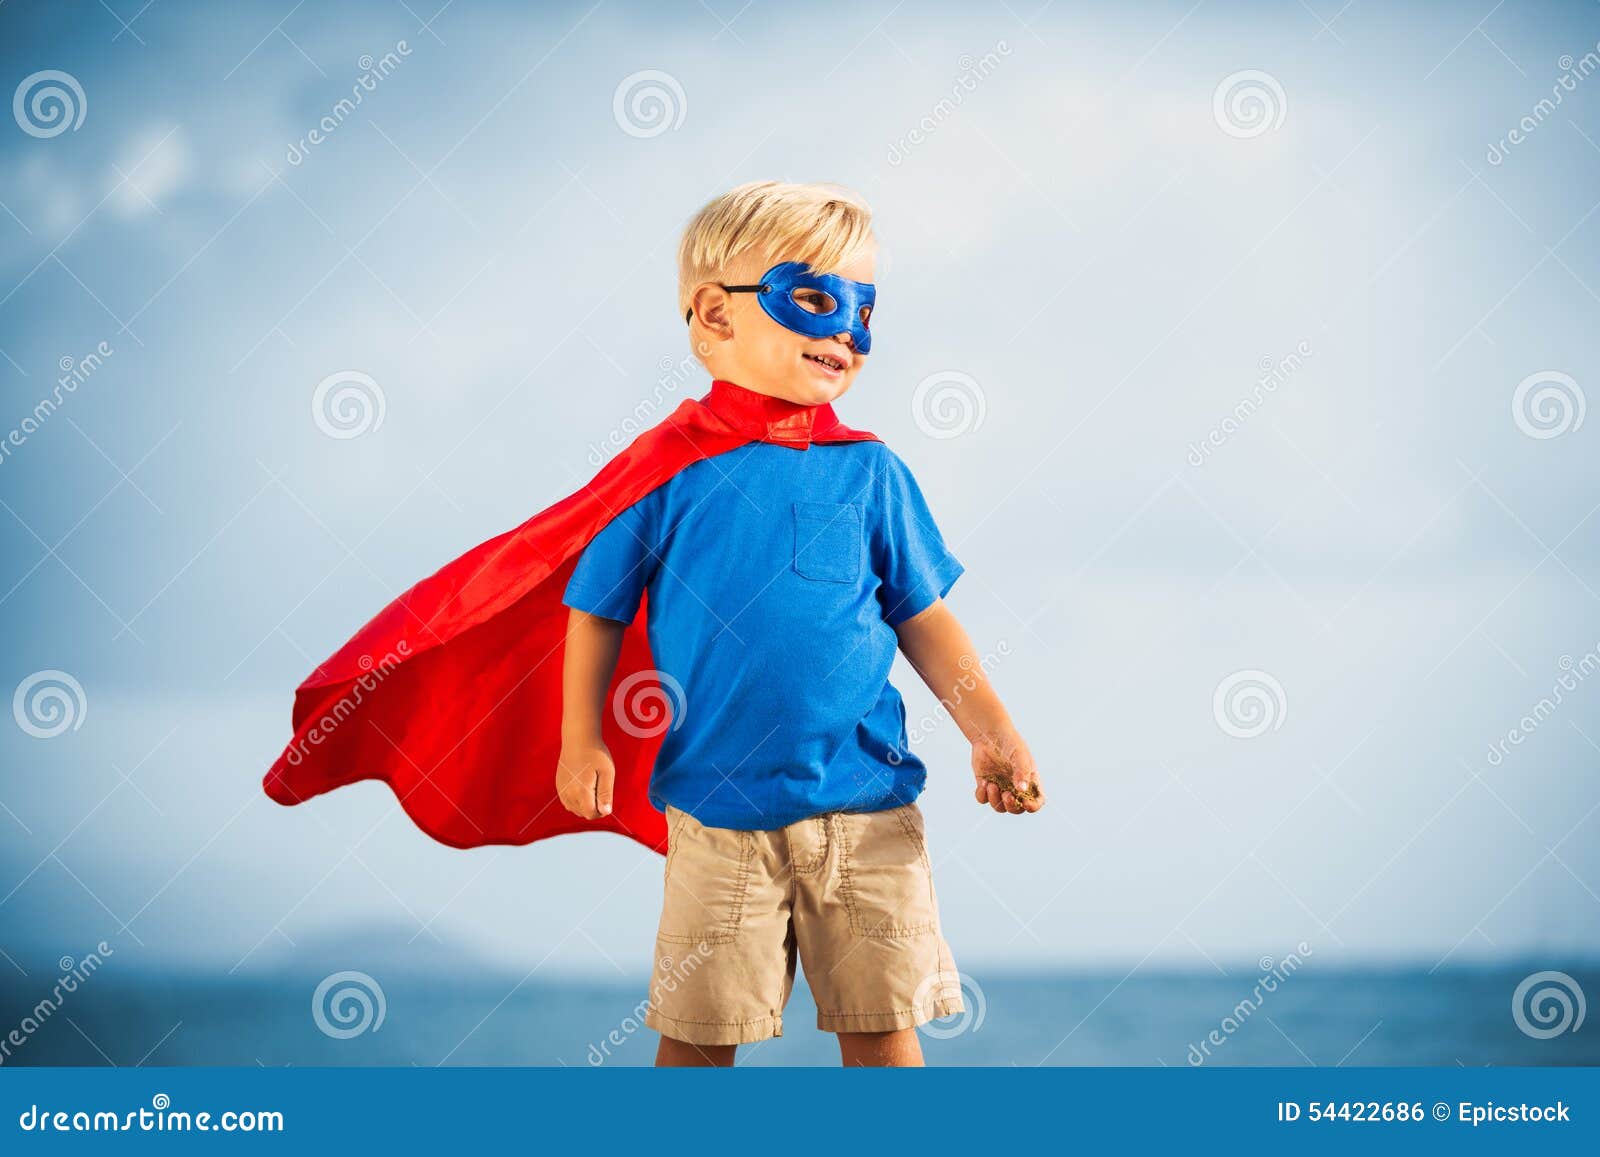 super hero kid with a mask flying